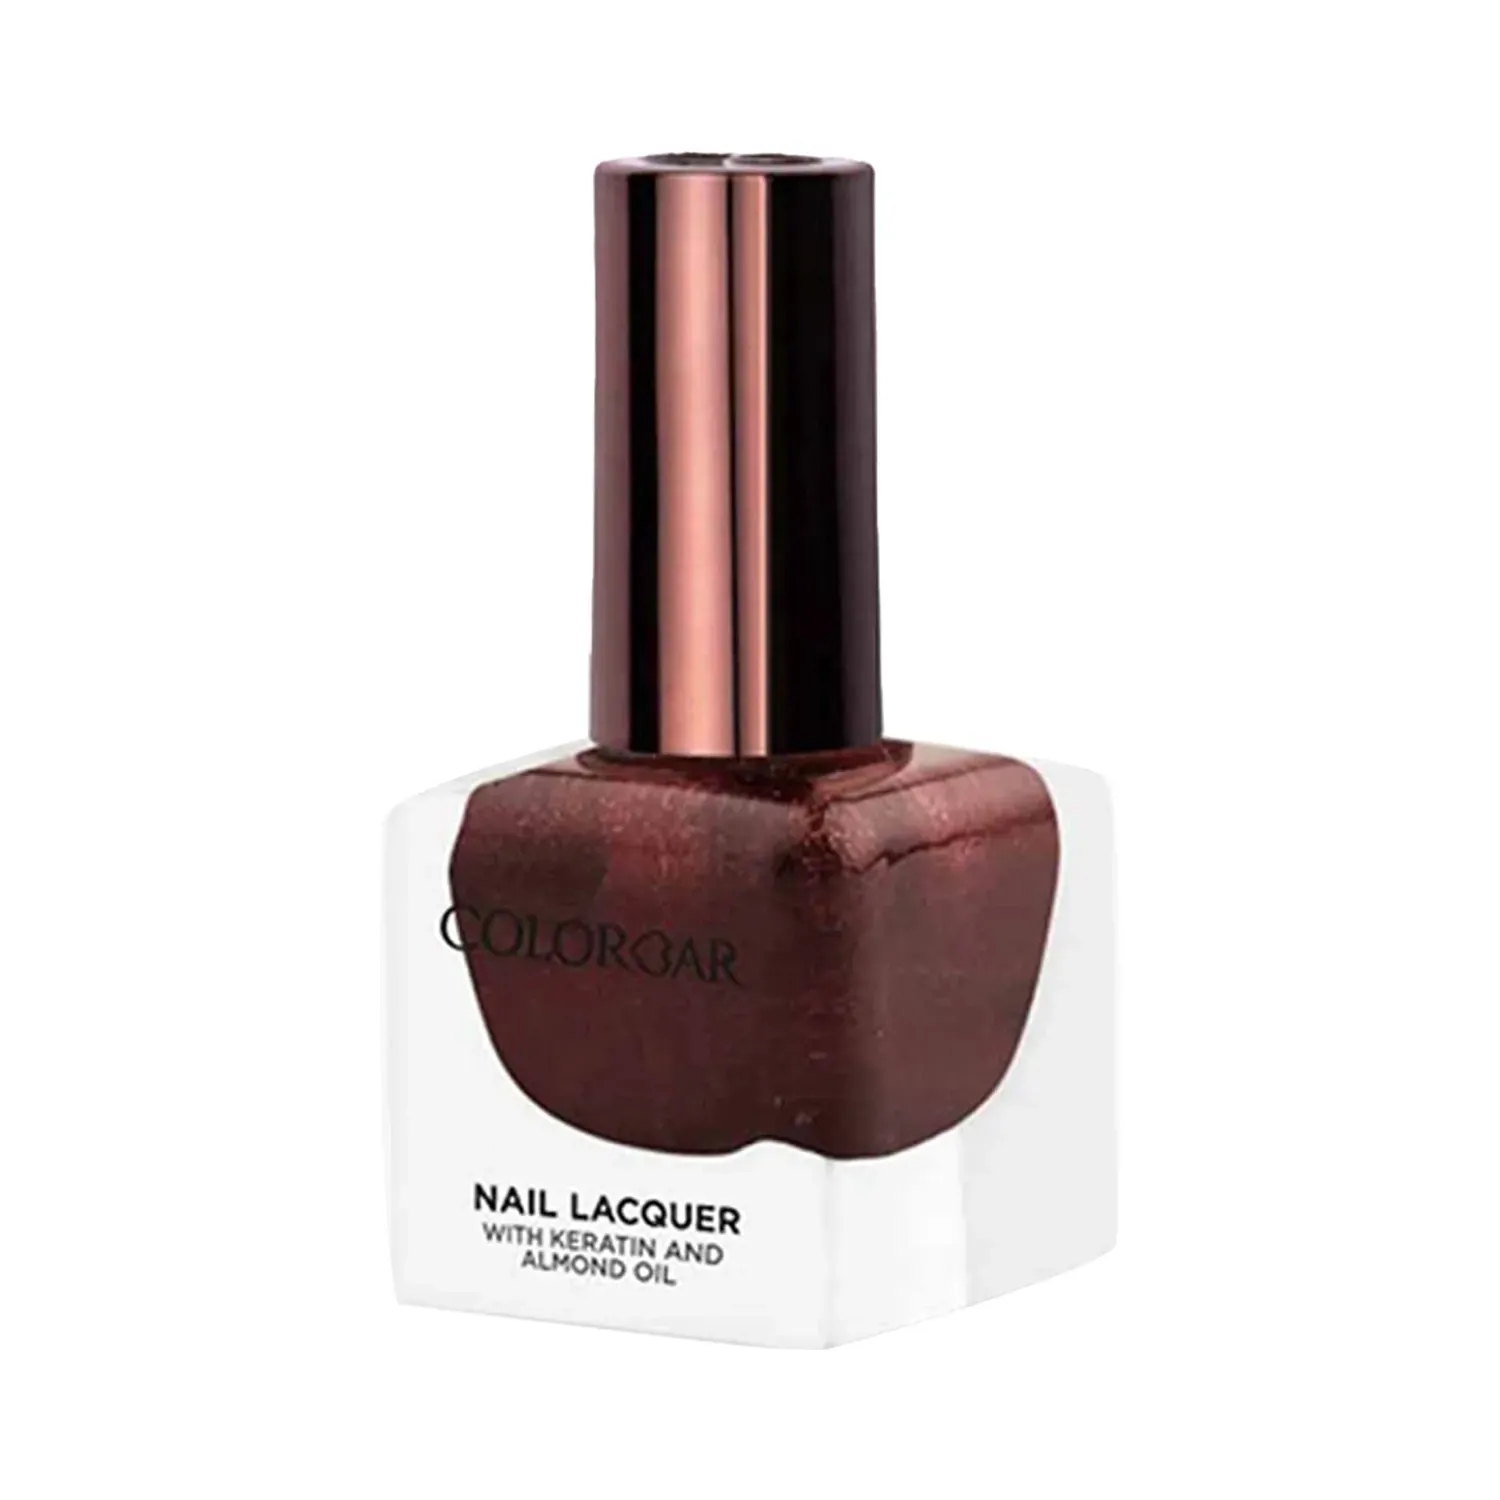 Buy COLORBAR Vegan Nail Lacquer | Shoppers Stop-megaelearning.vn